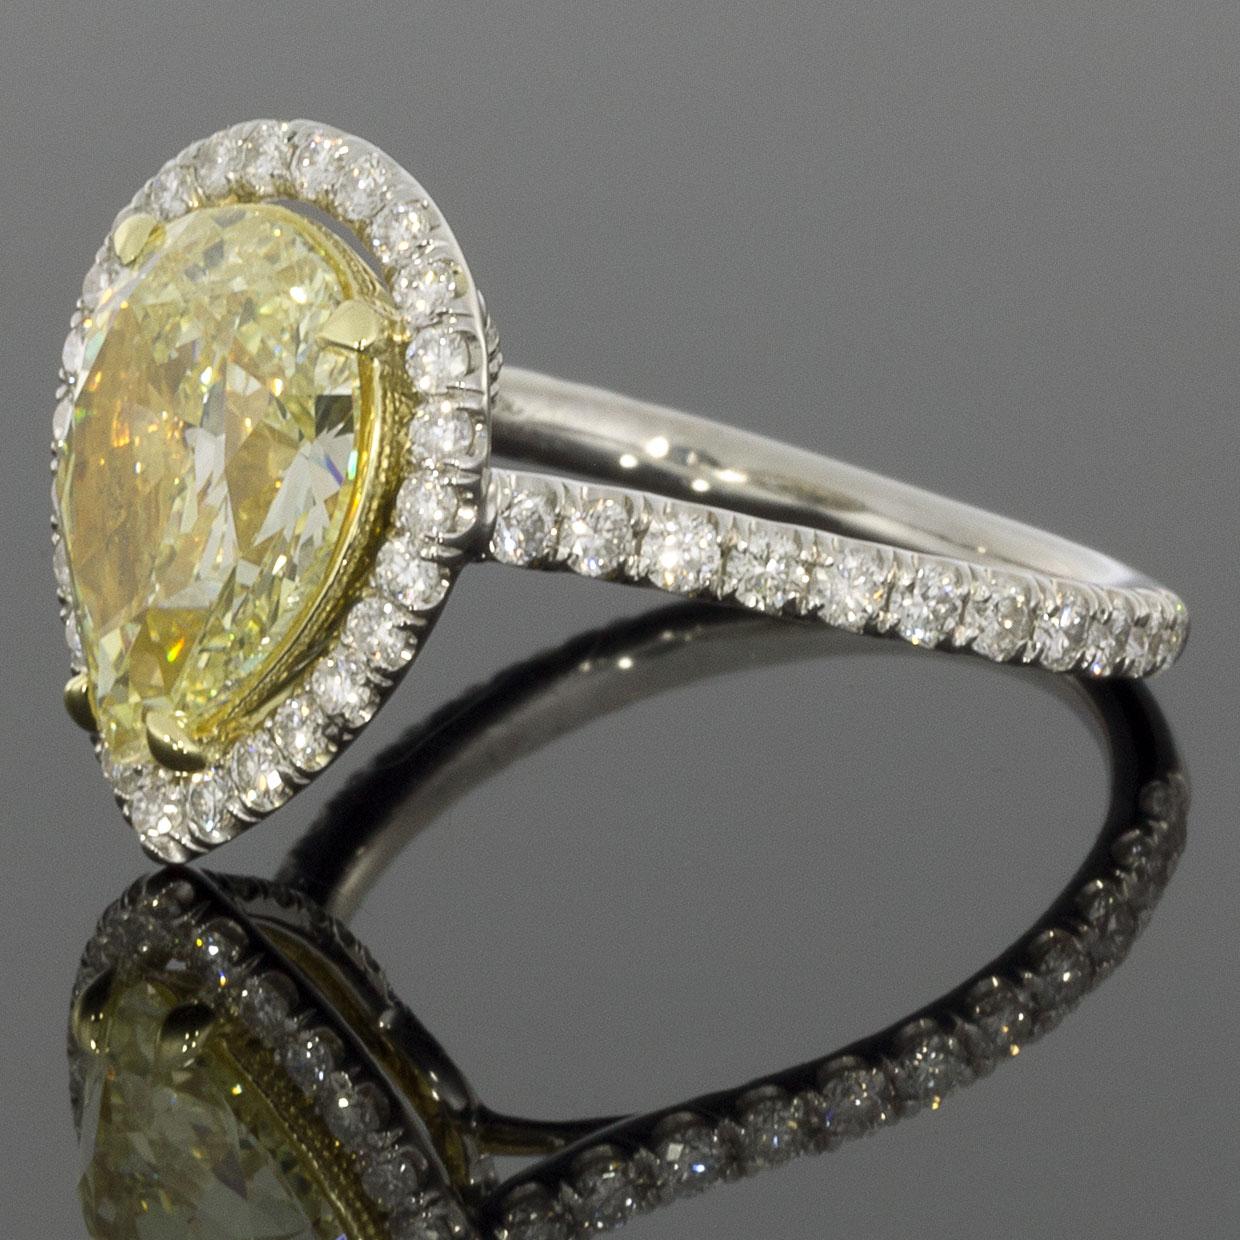 Item Details:
Estimated Retail - $29,000.00
Metal - 950 Platinum & 18 Karat Yellow Gold
Total Carat Weight (TCW) - 3.36 ctw
Certification/Grading - EGL US 903725001D 
Style - Halo Engagement Ring
Ring Size - 6.00
Sizable - Yes

Stone 1